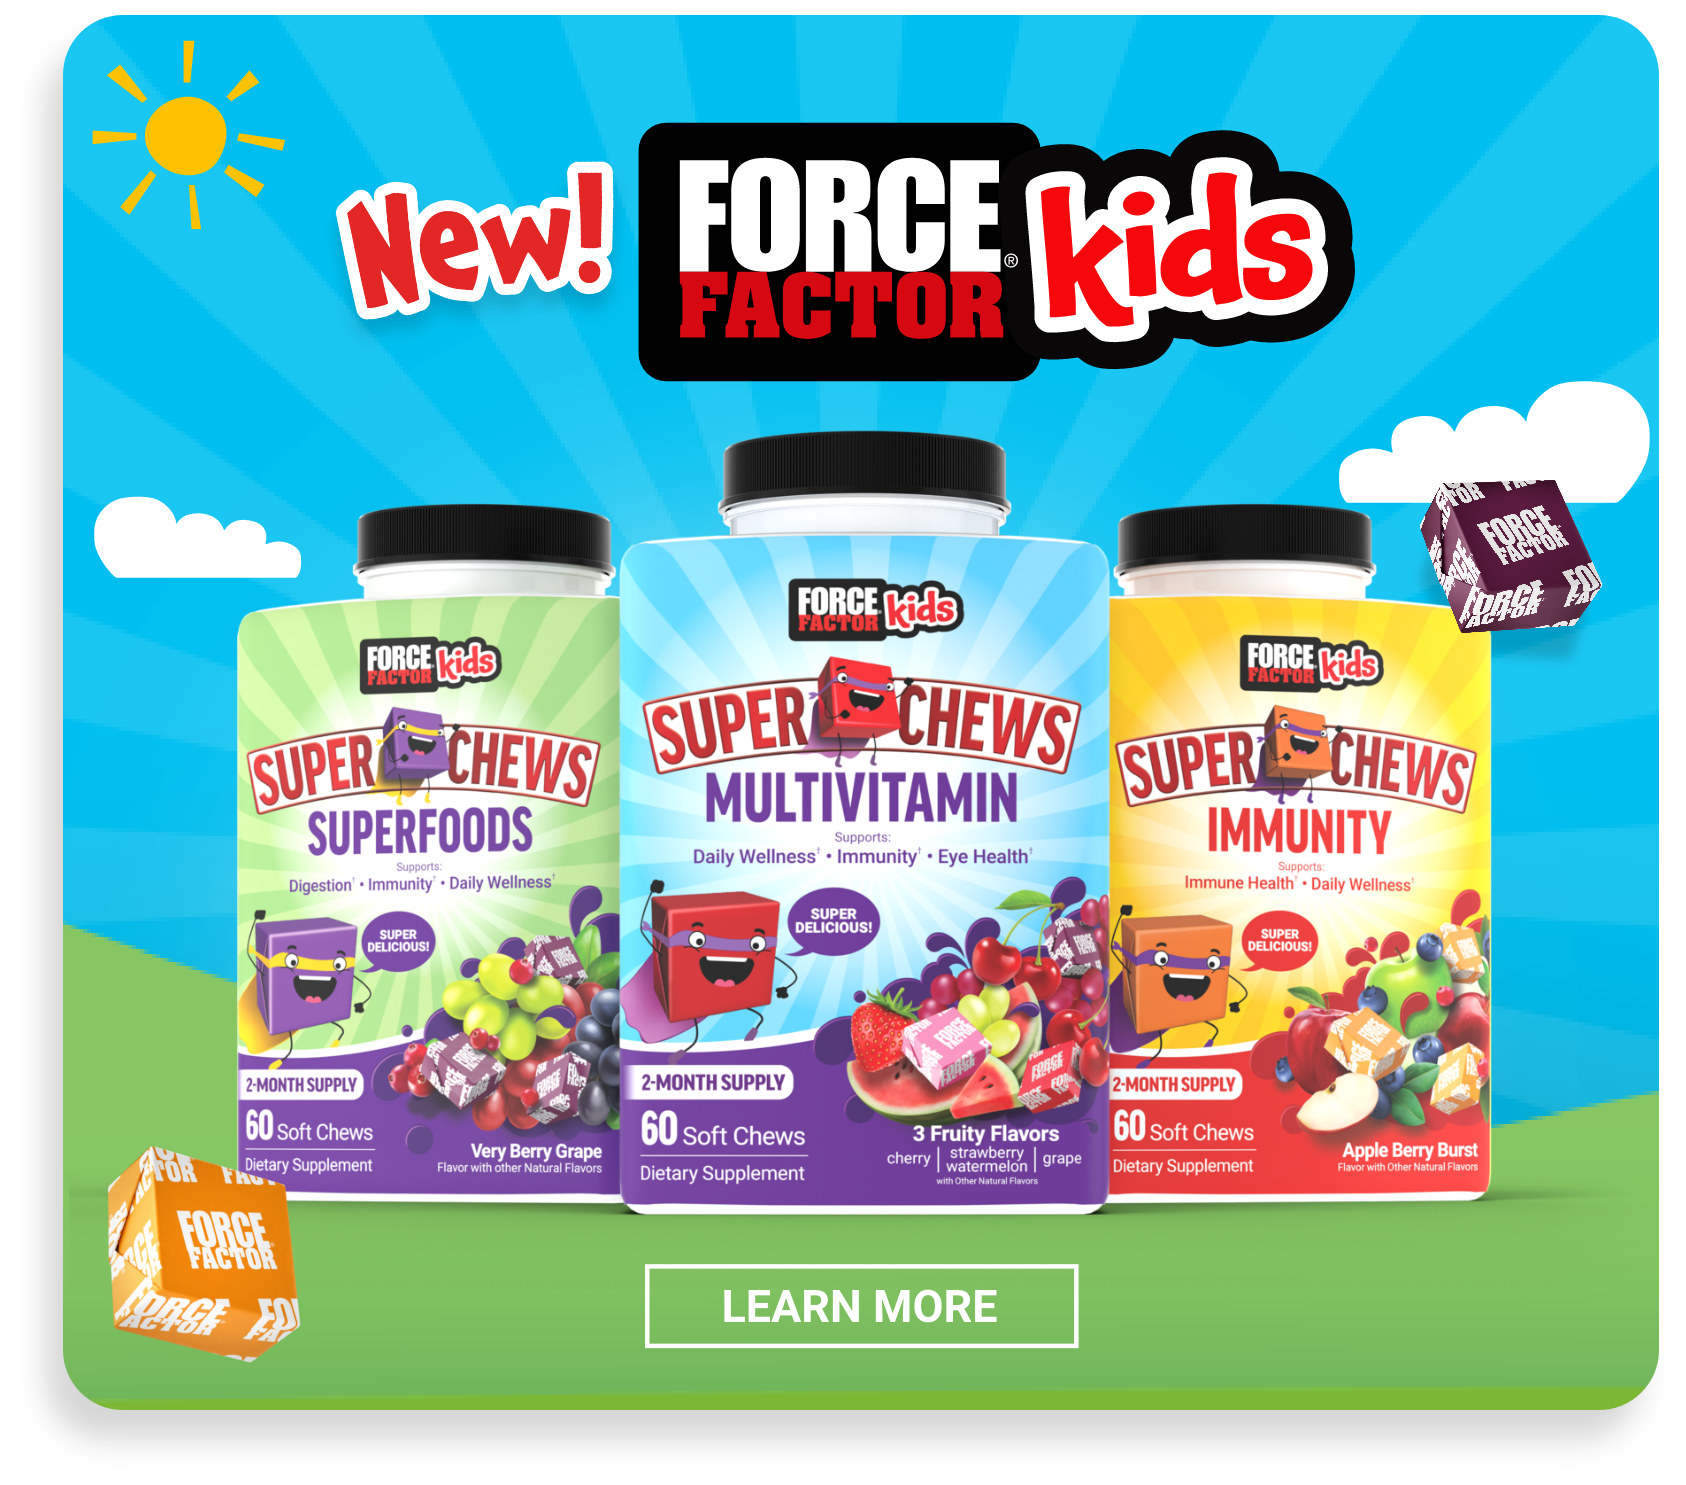 New! Force Factor Kids - Learn More